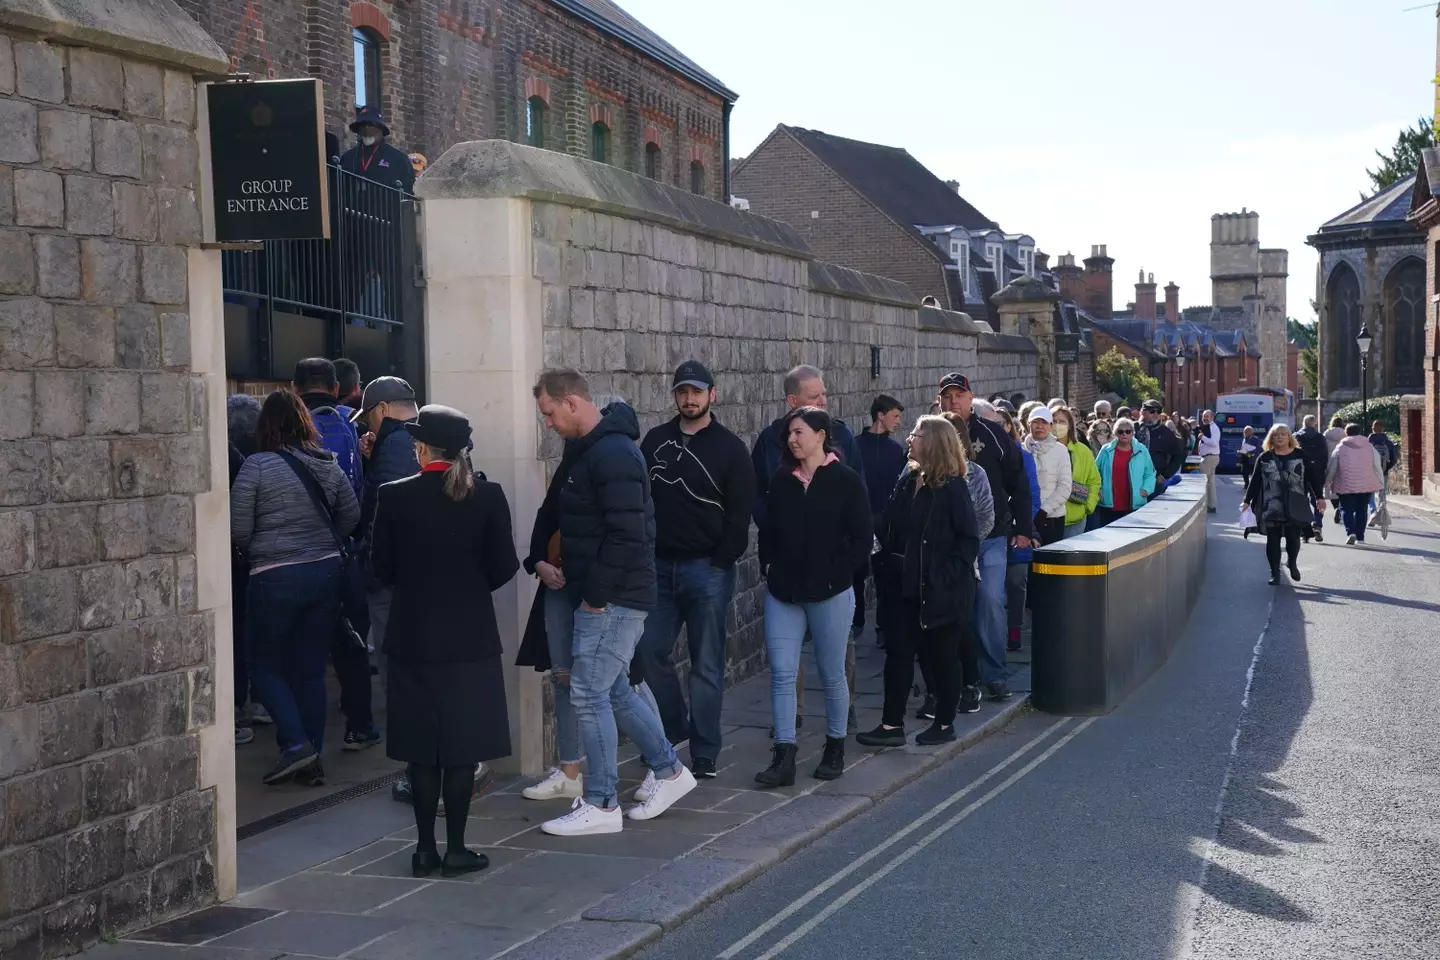 People queue outside as Windsor Castle and St George's Chapel reopen to public for first time since Queen Elizabeth II's death.